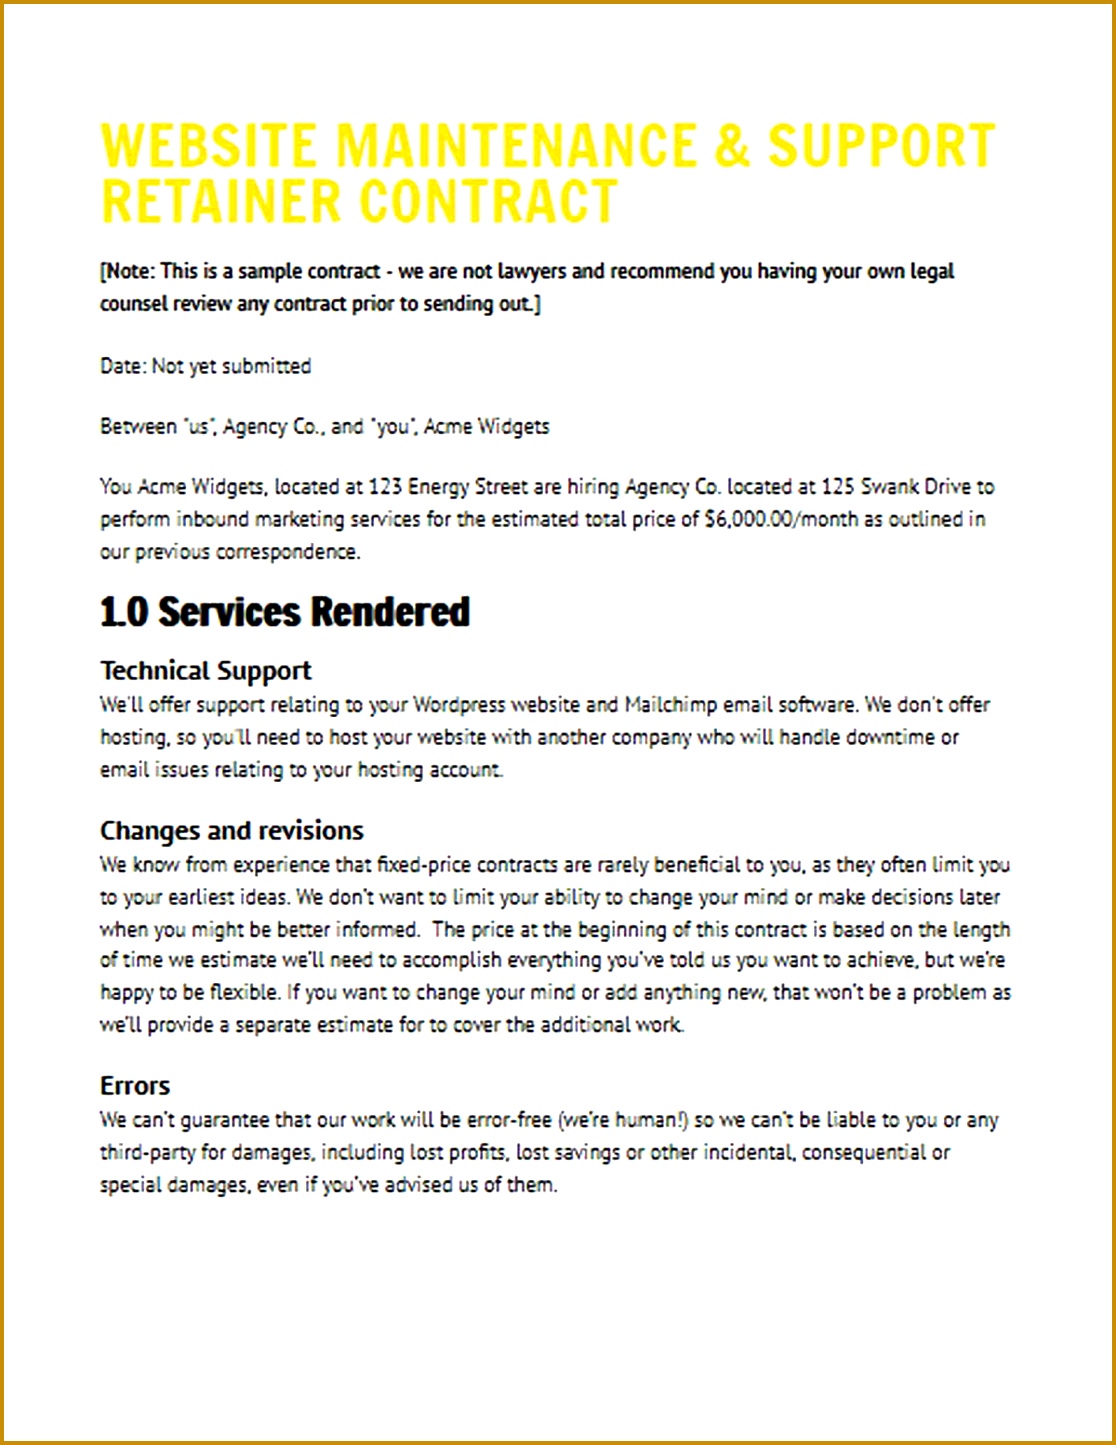 Web Support Retainer Proposal Sample Contract Form 11161445